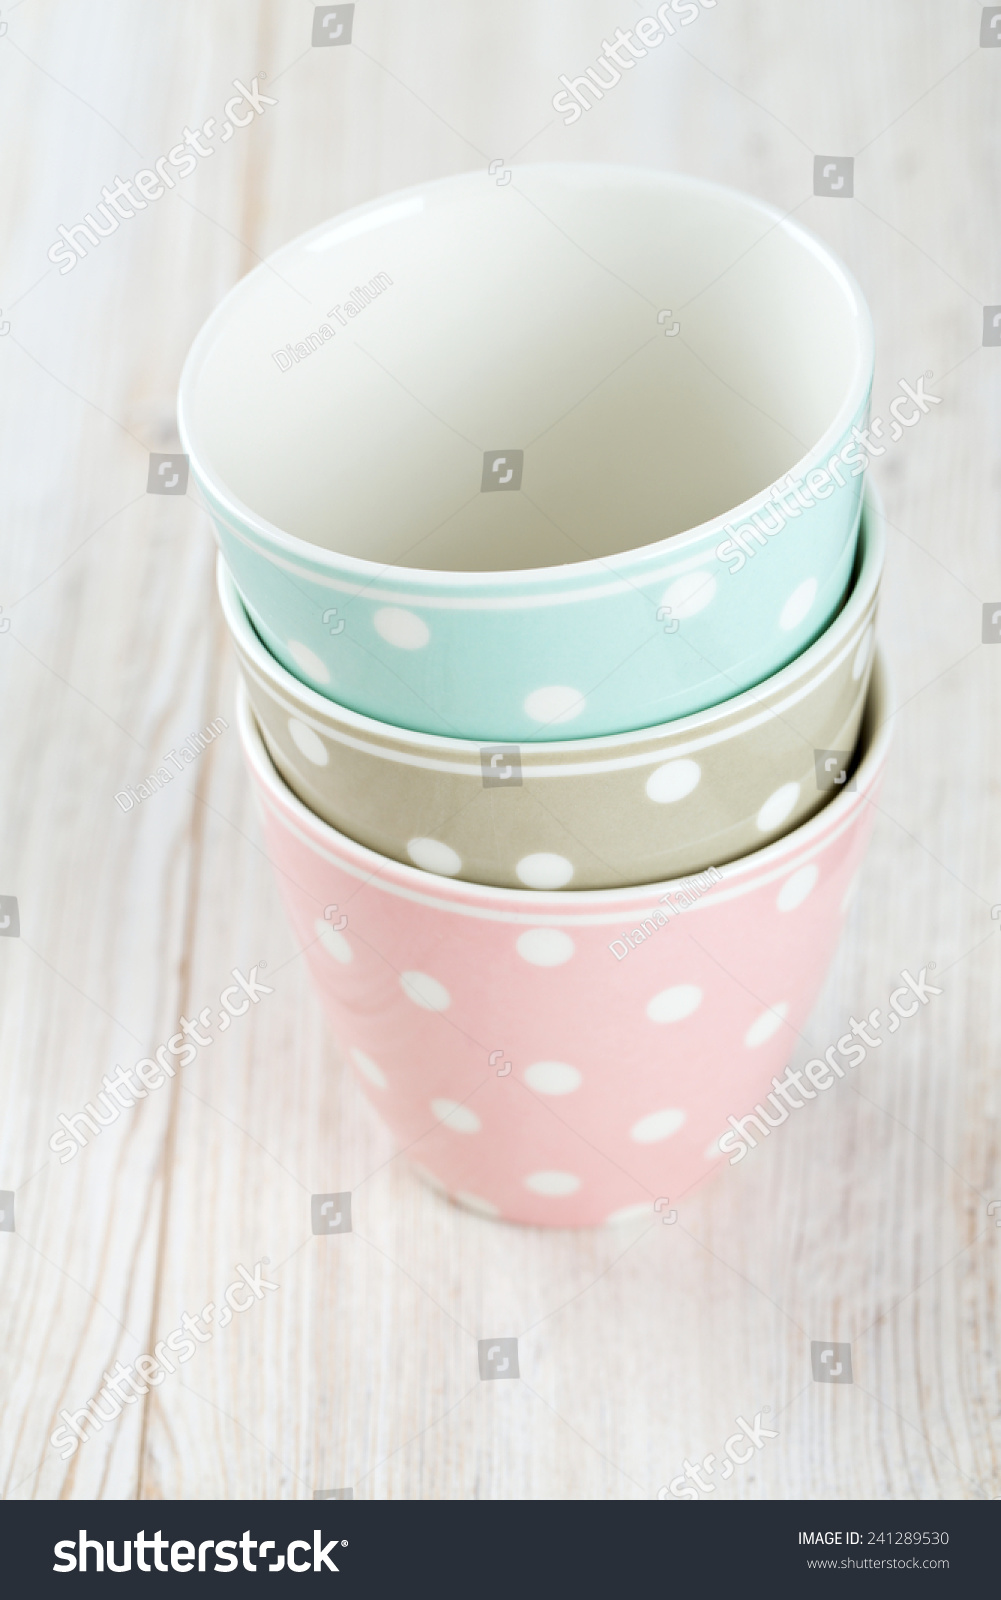 polka dot cups on wooden surface #241289530